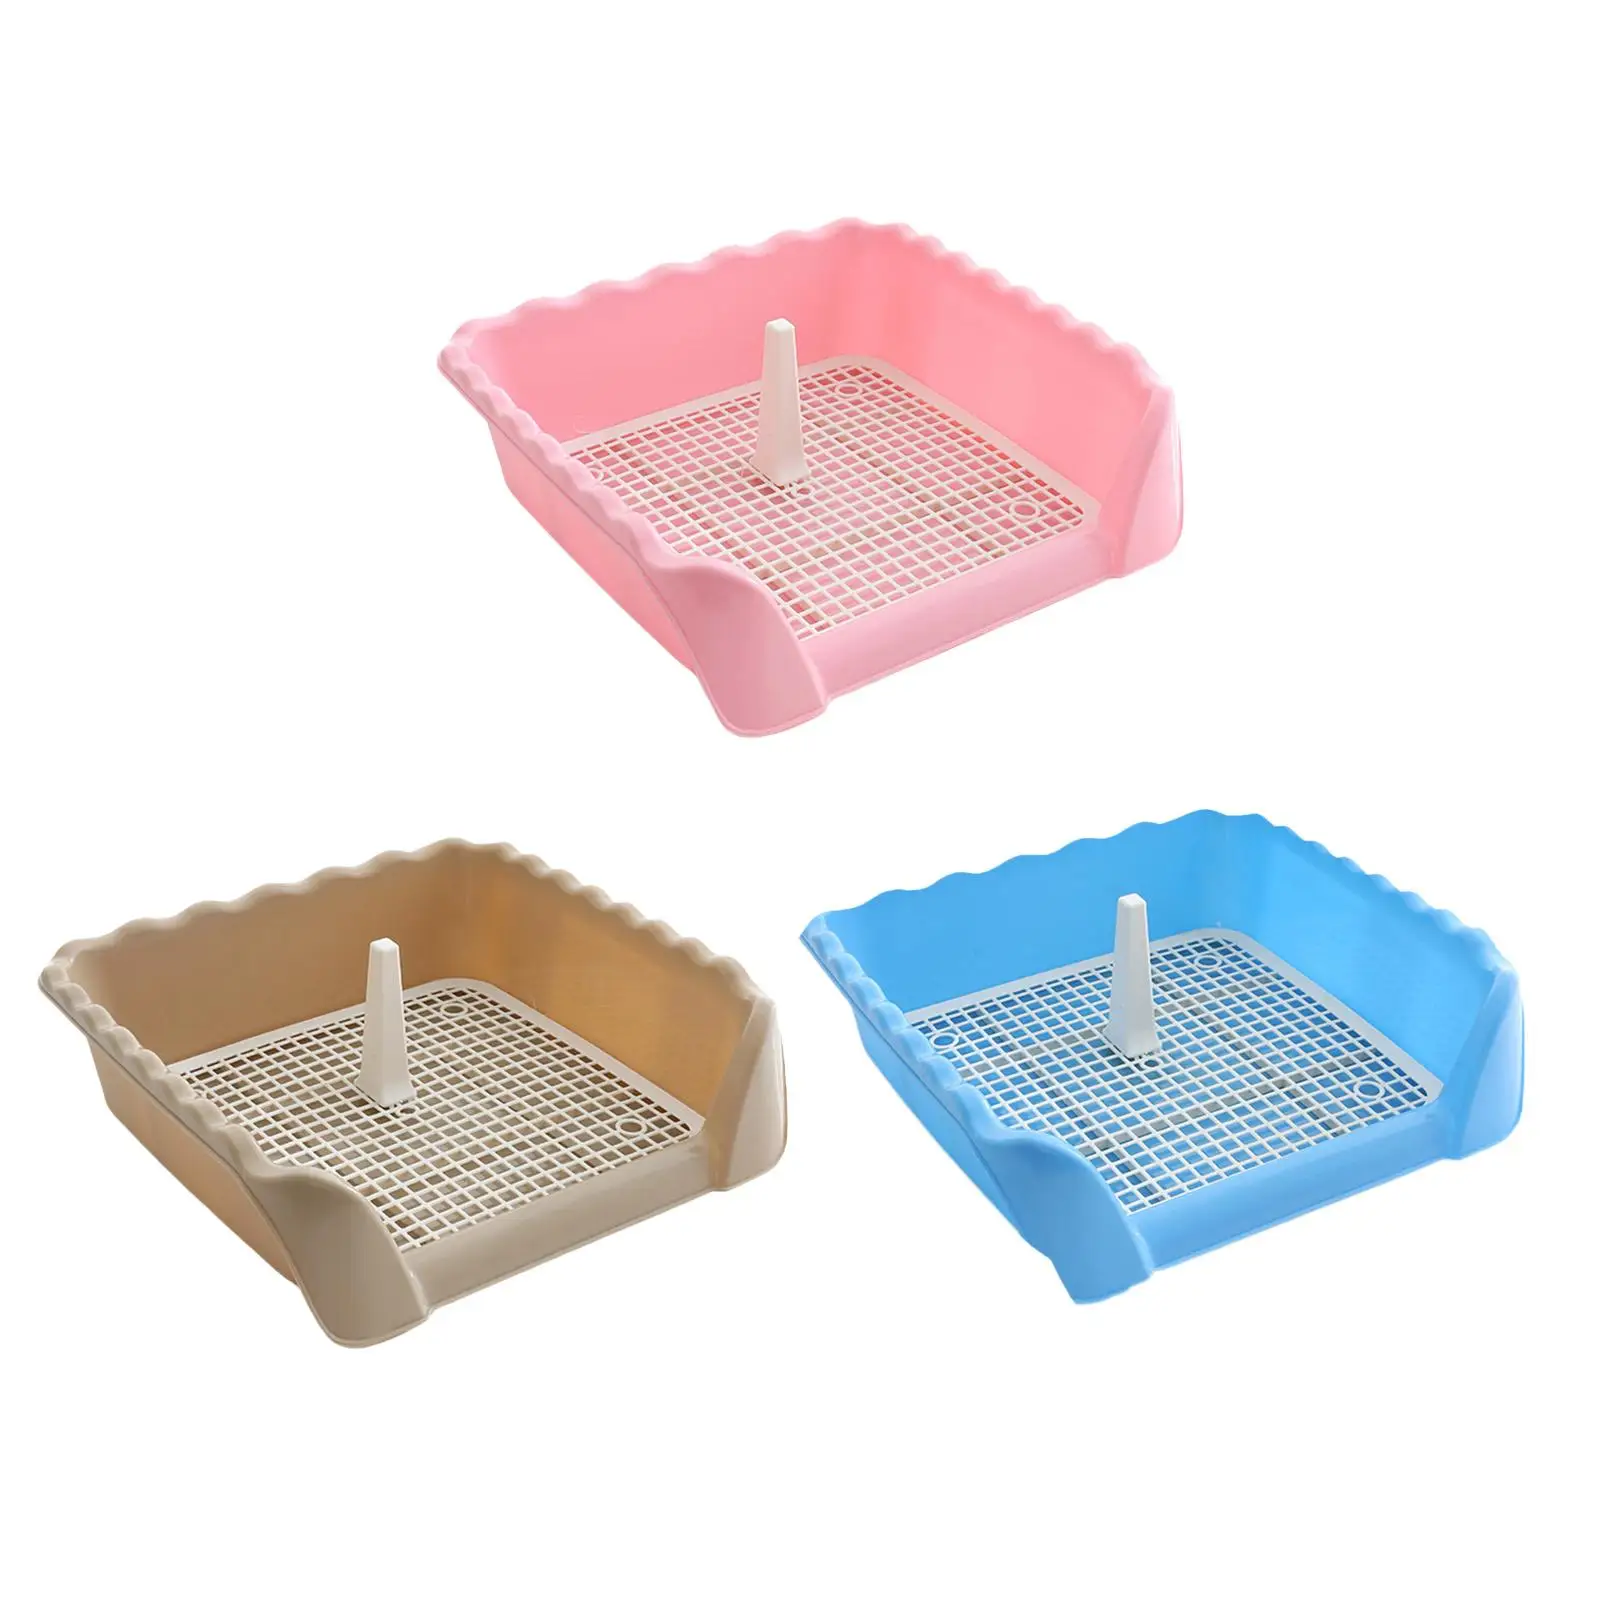 Portable Dog Potty Toilet Pad Non-Slip with Protective  Keep Floors  Toilet for Hamsters Litter Boxes Cats